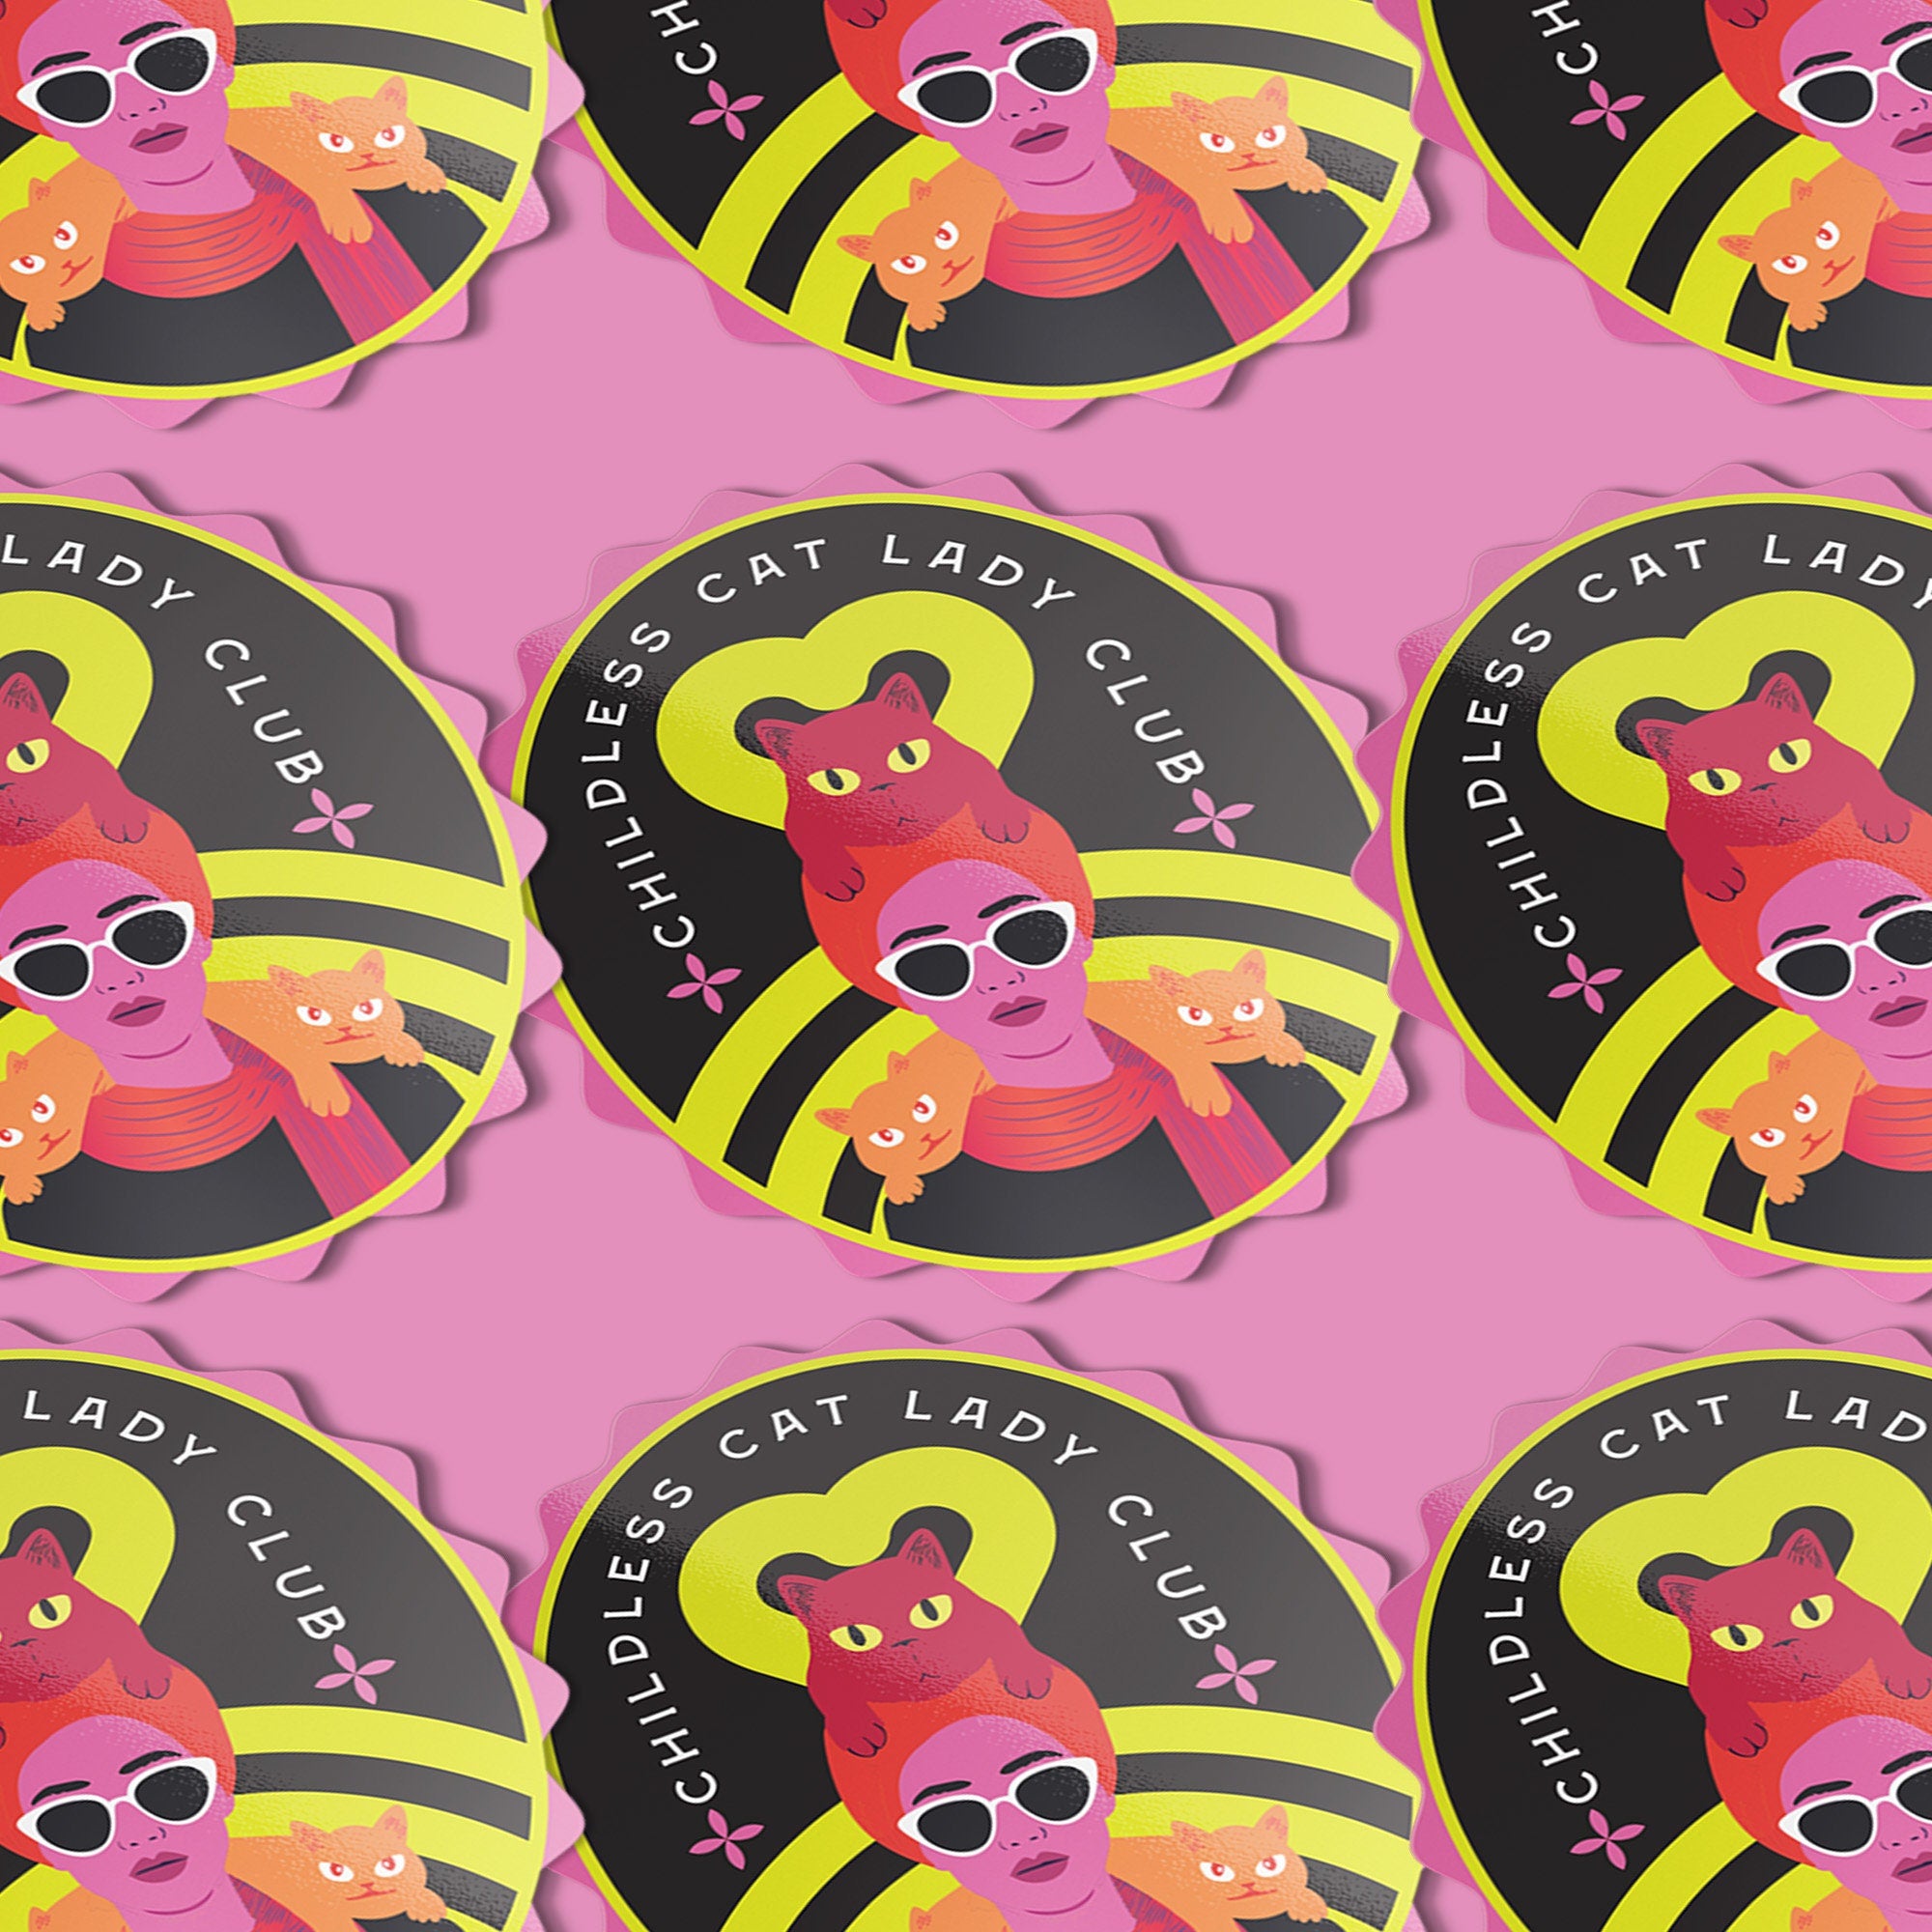 Vibrant oval sticker reading "Childless Cat Lady Club". Features cartoon woman with sunglasses surrounded by cats. Bold retro design in pink, yellow, and red.